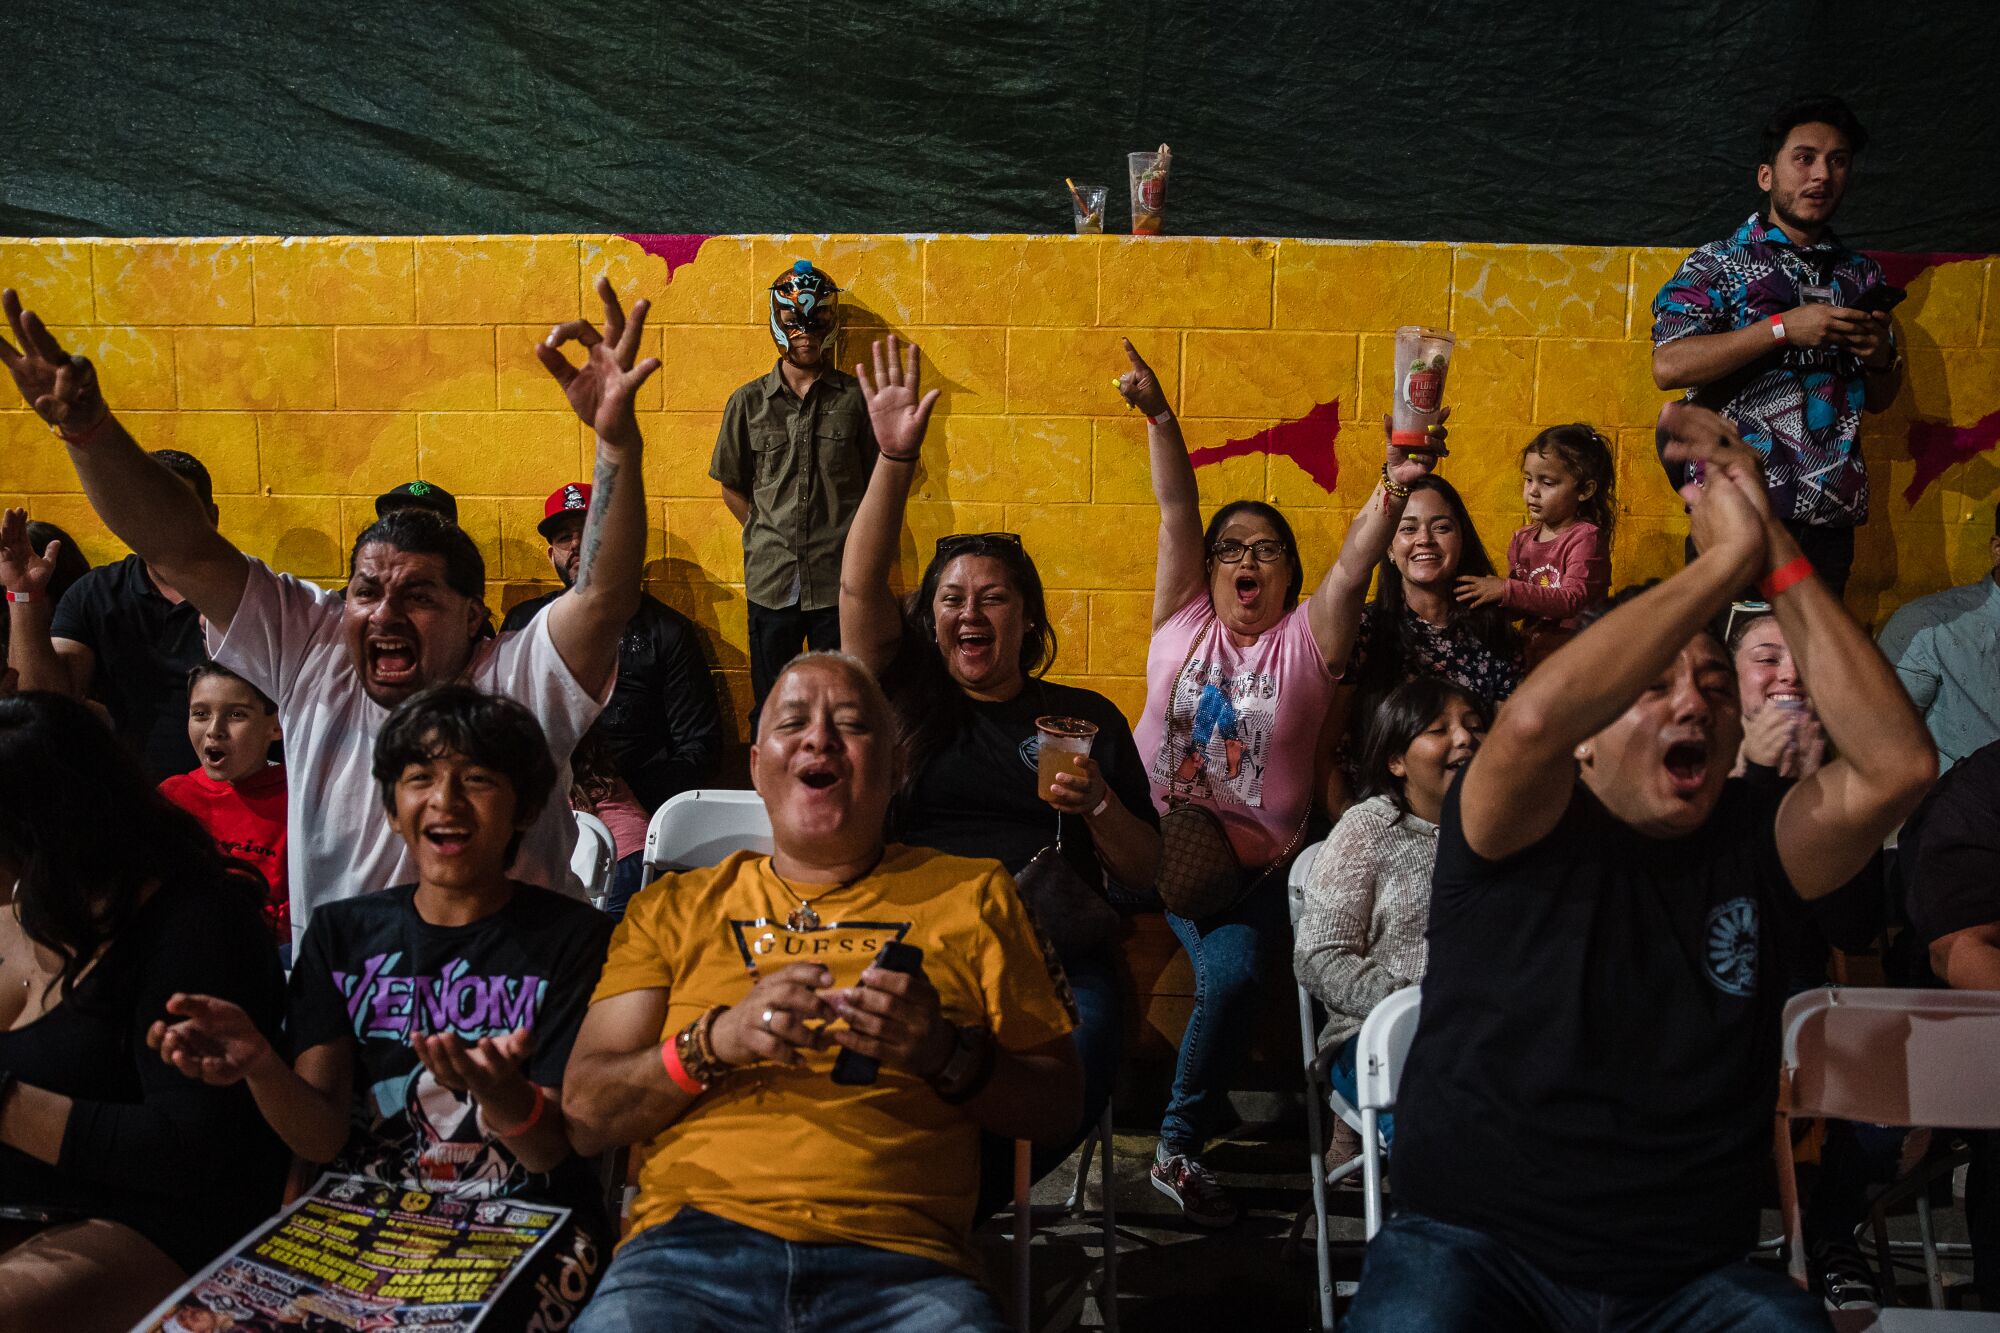 People cheer during the Baja Stars USA Lucha Libre event at the Mujeres Brew House in Logan Heights.